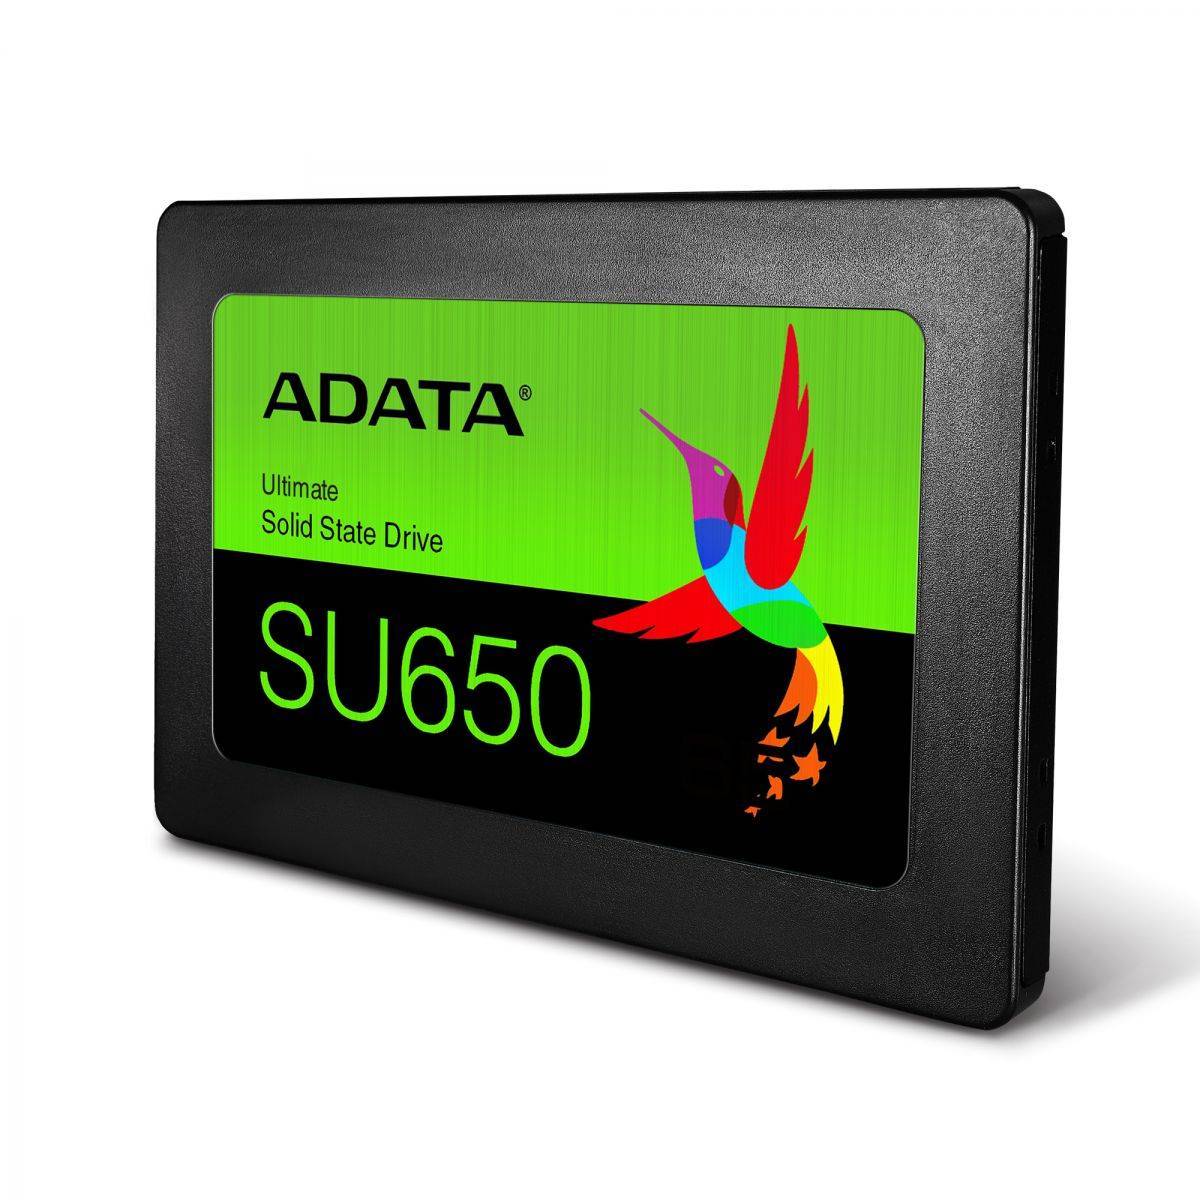 ADATA 120GB SSD SU650 TLC 2.5" SATAIII 3D NAND, SLC cach / without 2.5 to 3.5 brackets / blister